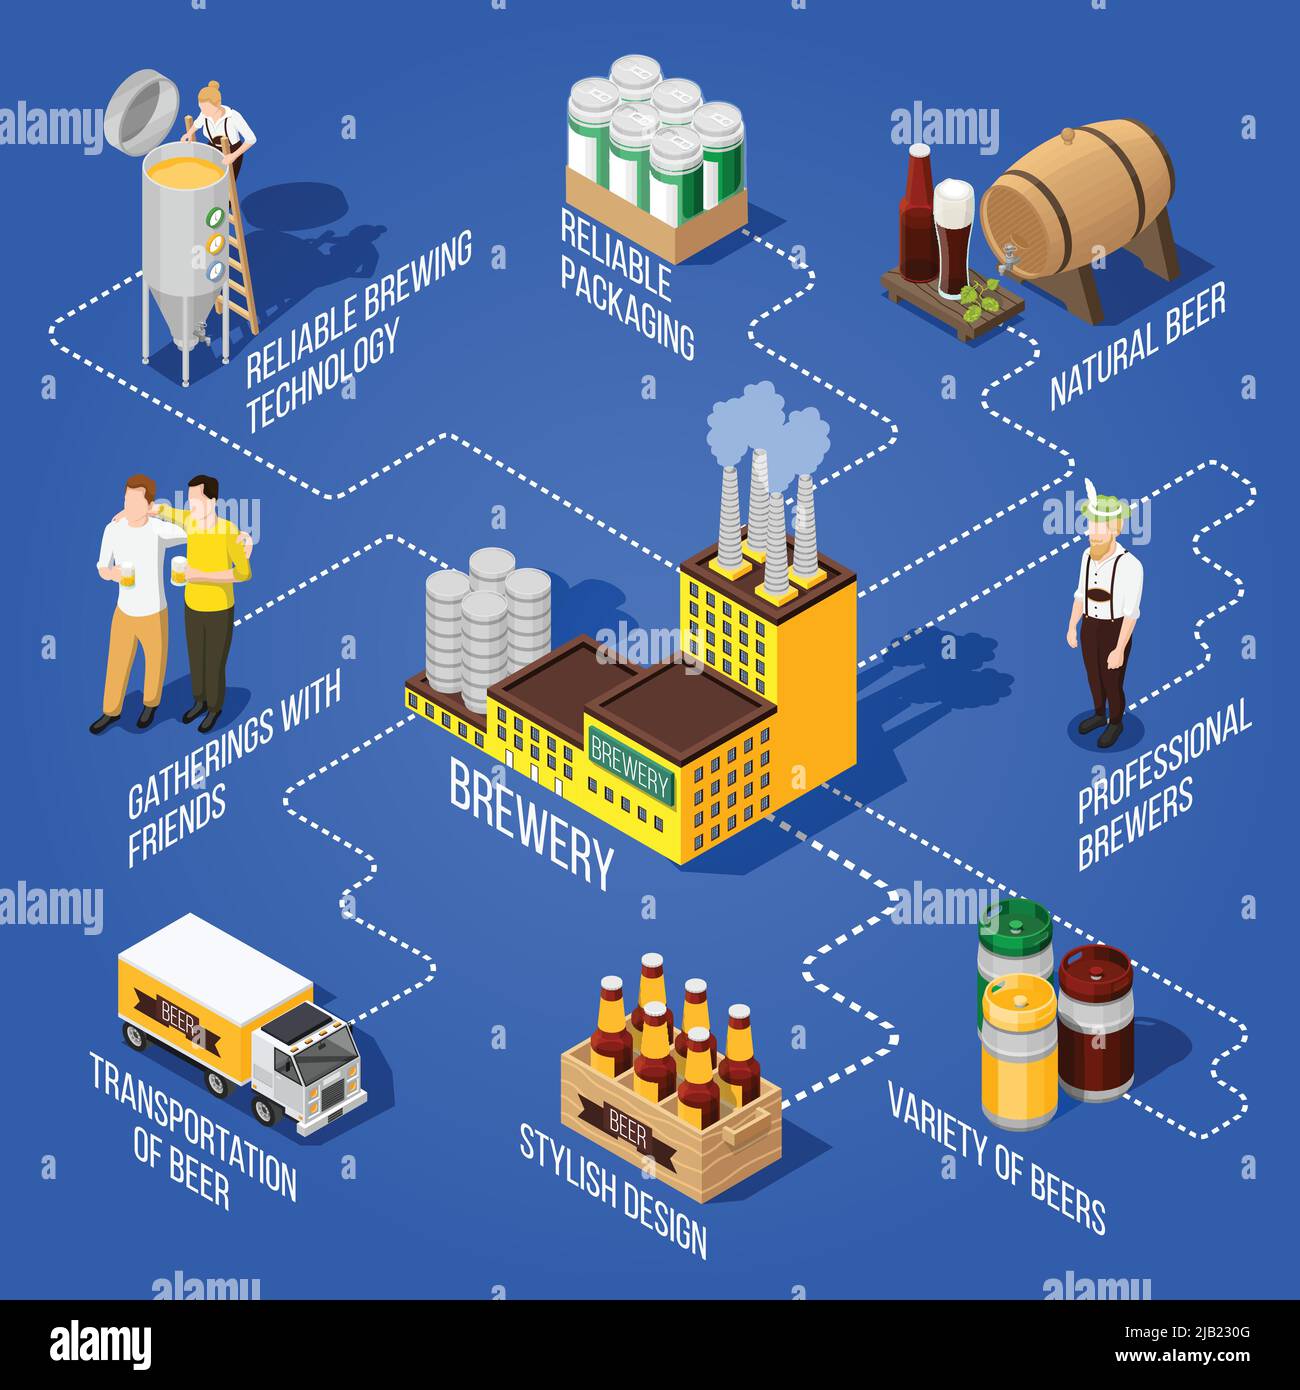 Isometric flowchart presenting different kinds of beer production its transportation and professional brewers on blue background 3d vector illustratio Stock Vector